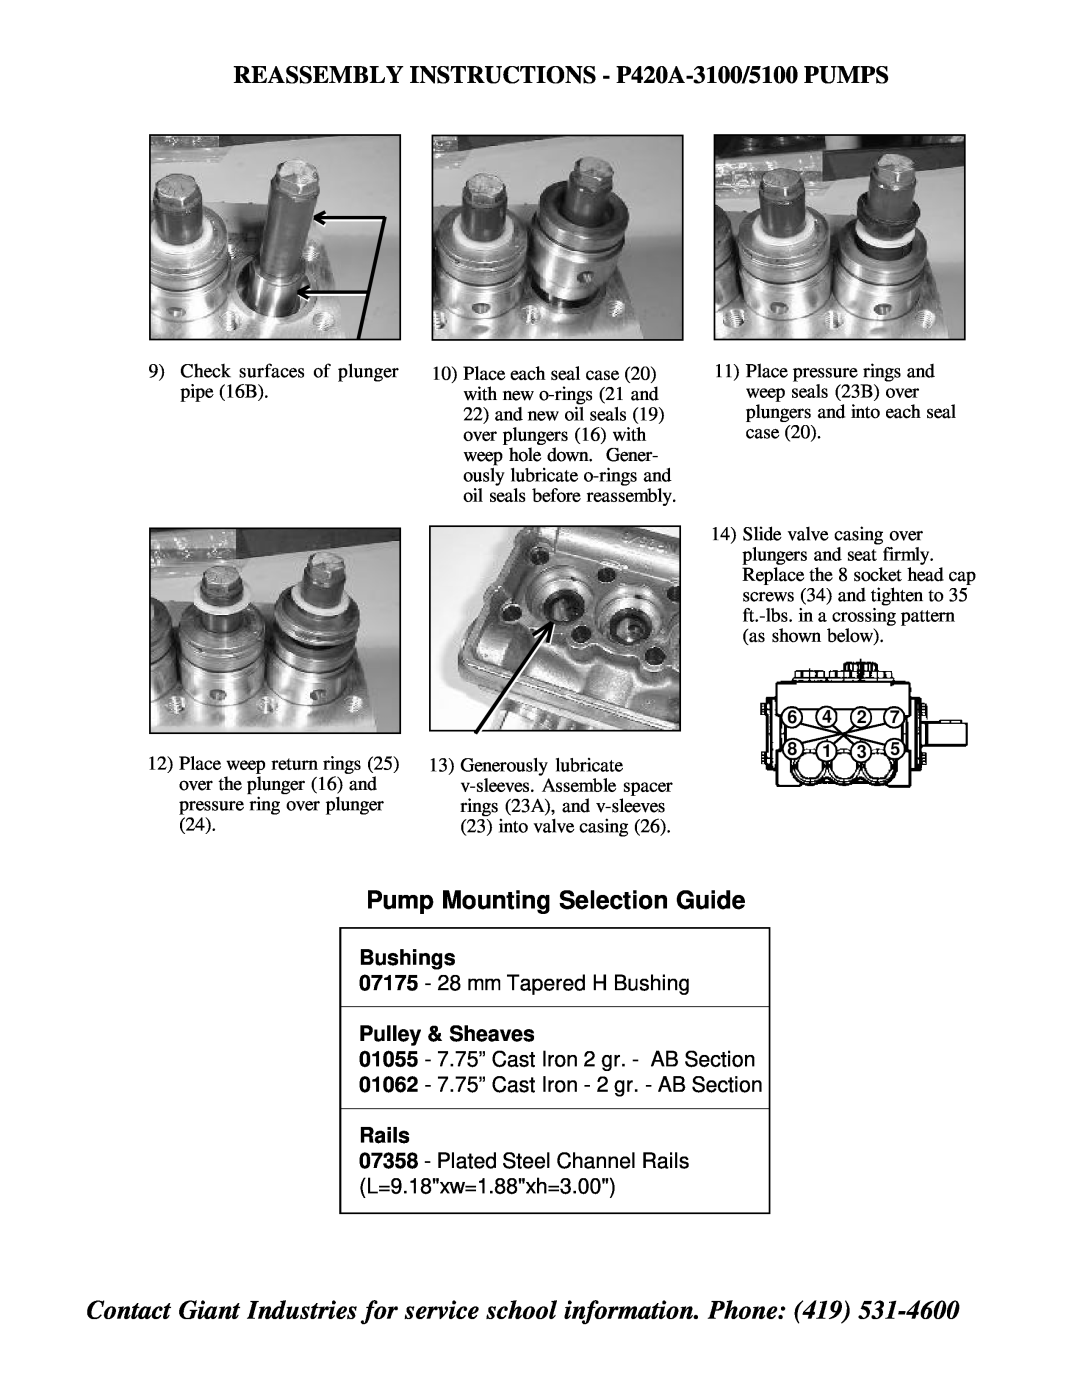 Giant REASSEMBLY INSTRUCTIONS - P420A-3100/5100 PUMPS, Pump Mounting Selection Guide, Bushings, Pulley & Sheaves, Rails 